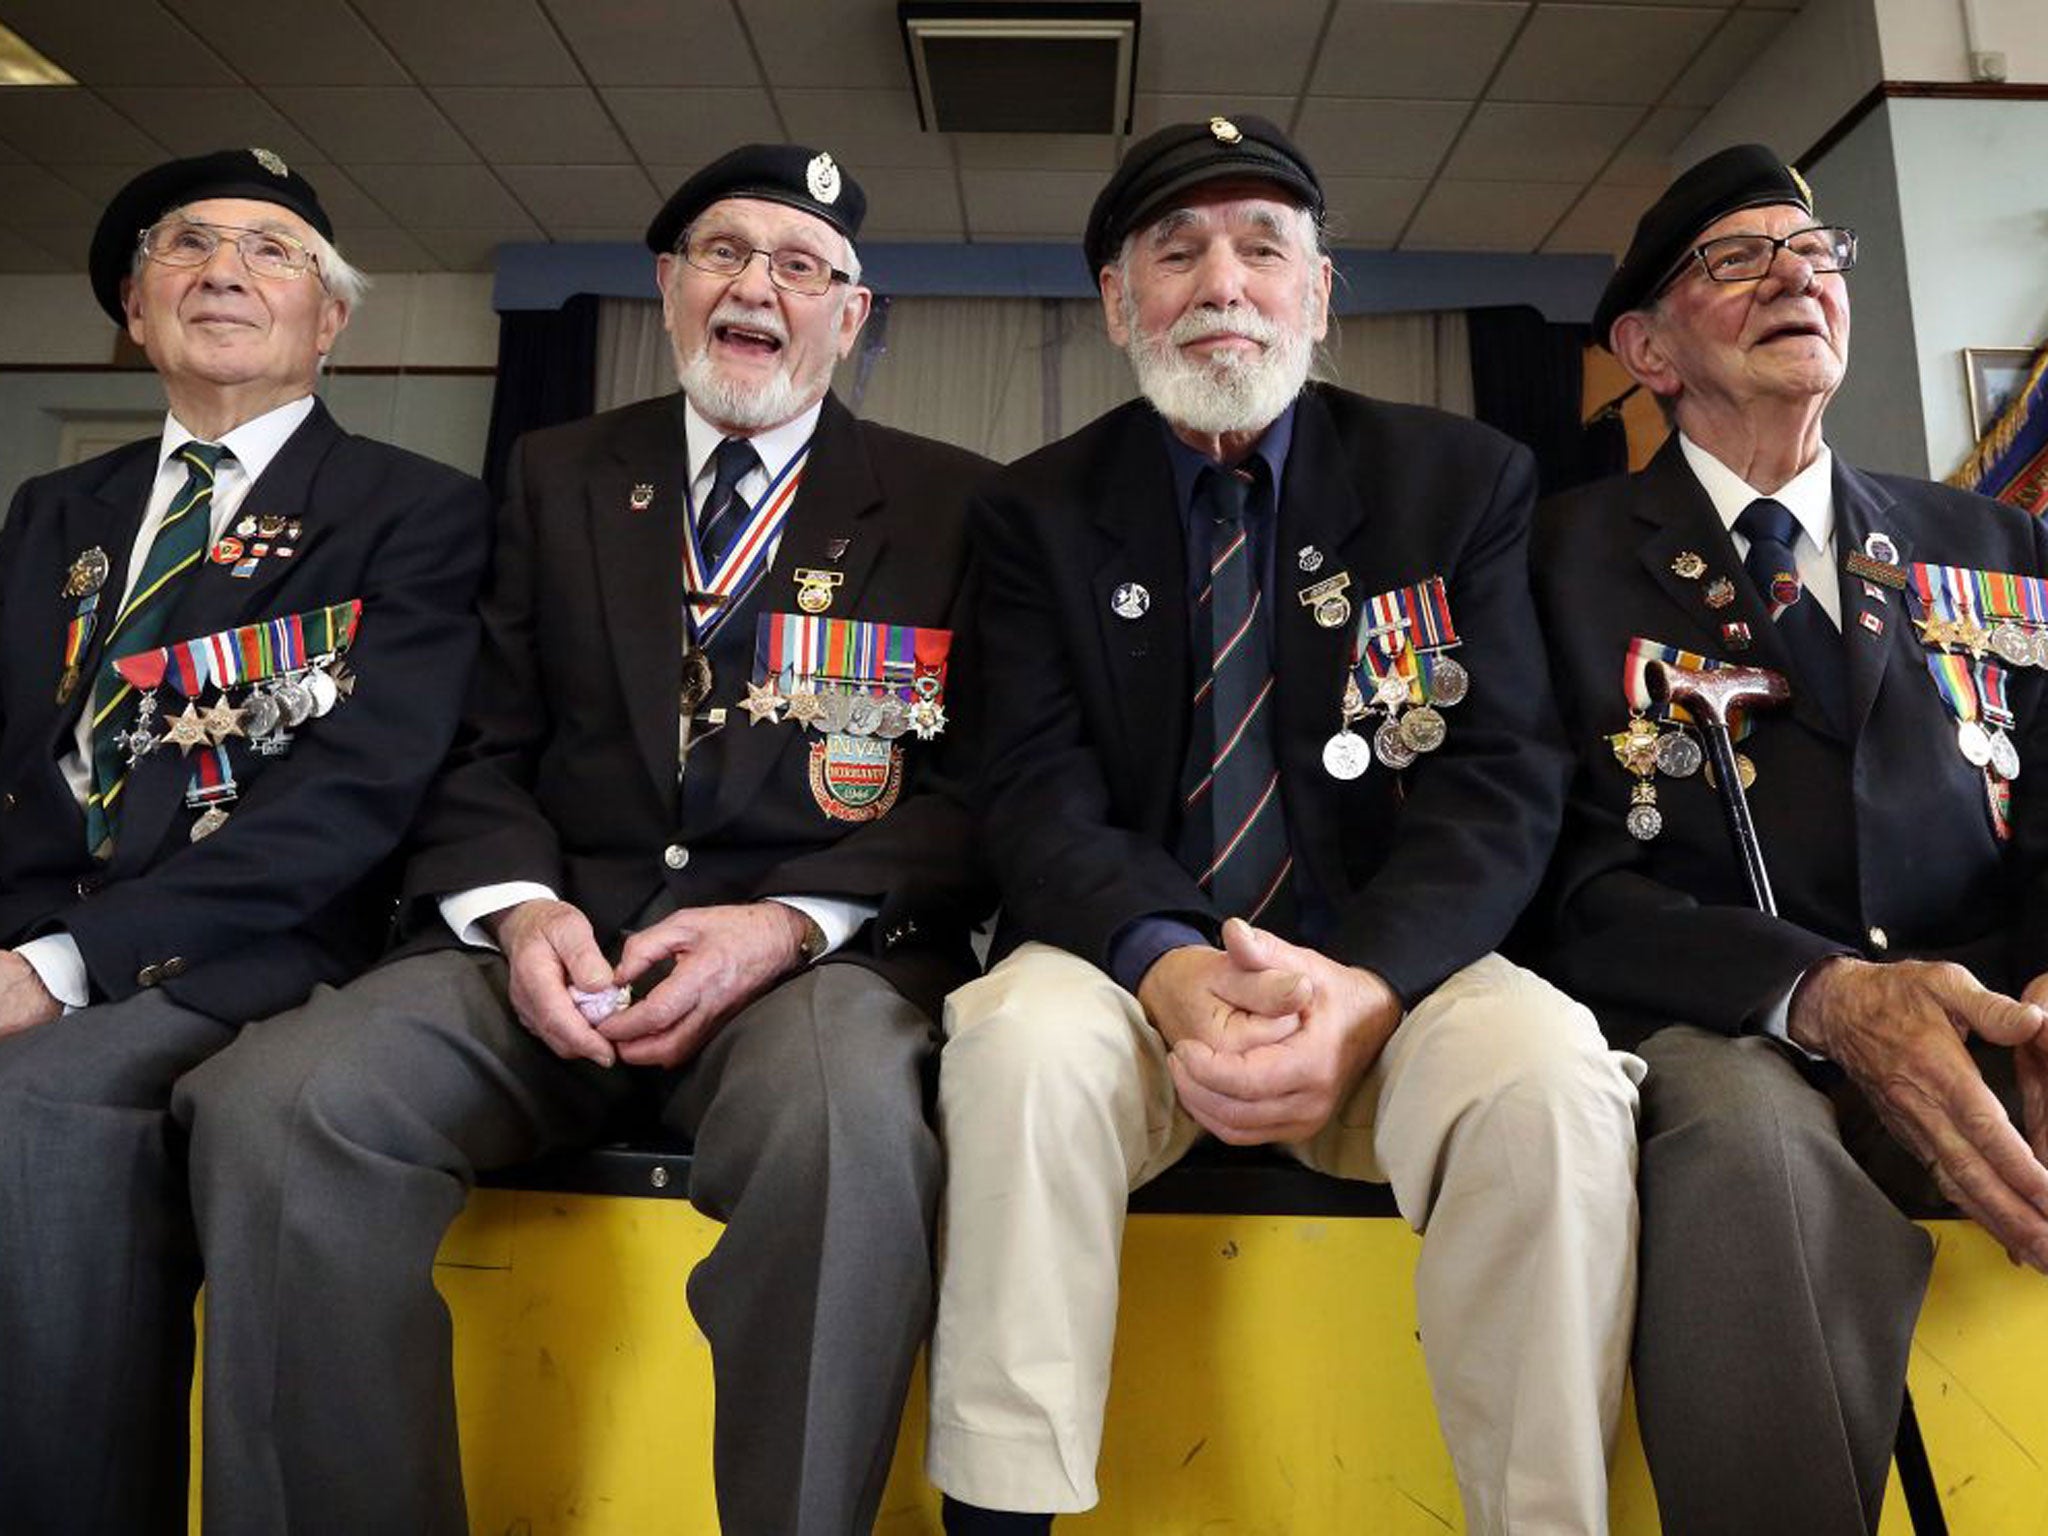 On left, Ian Hammerton with his fellow Normandy veterans George Batts, Jim Radford and George Dangerfield